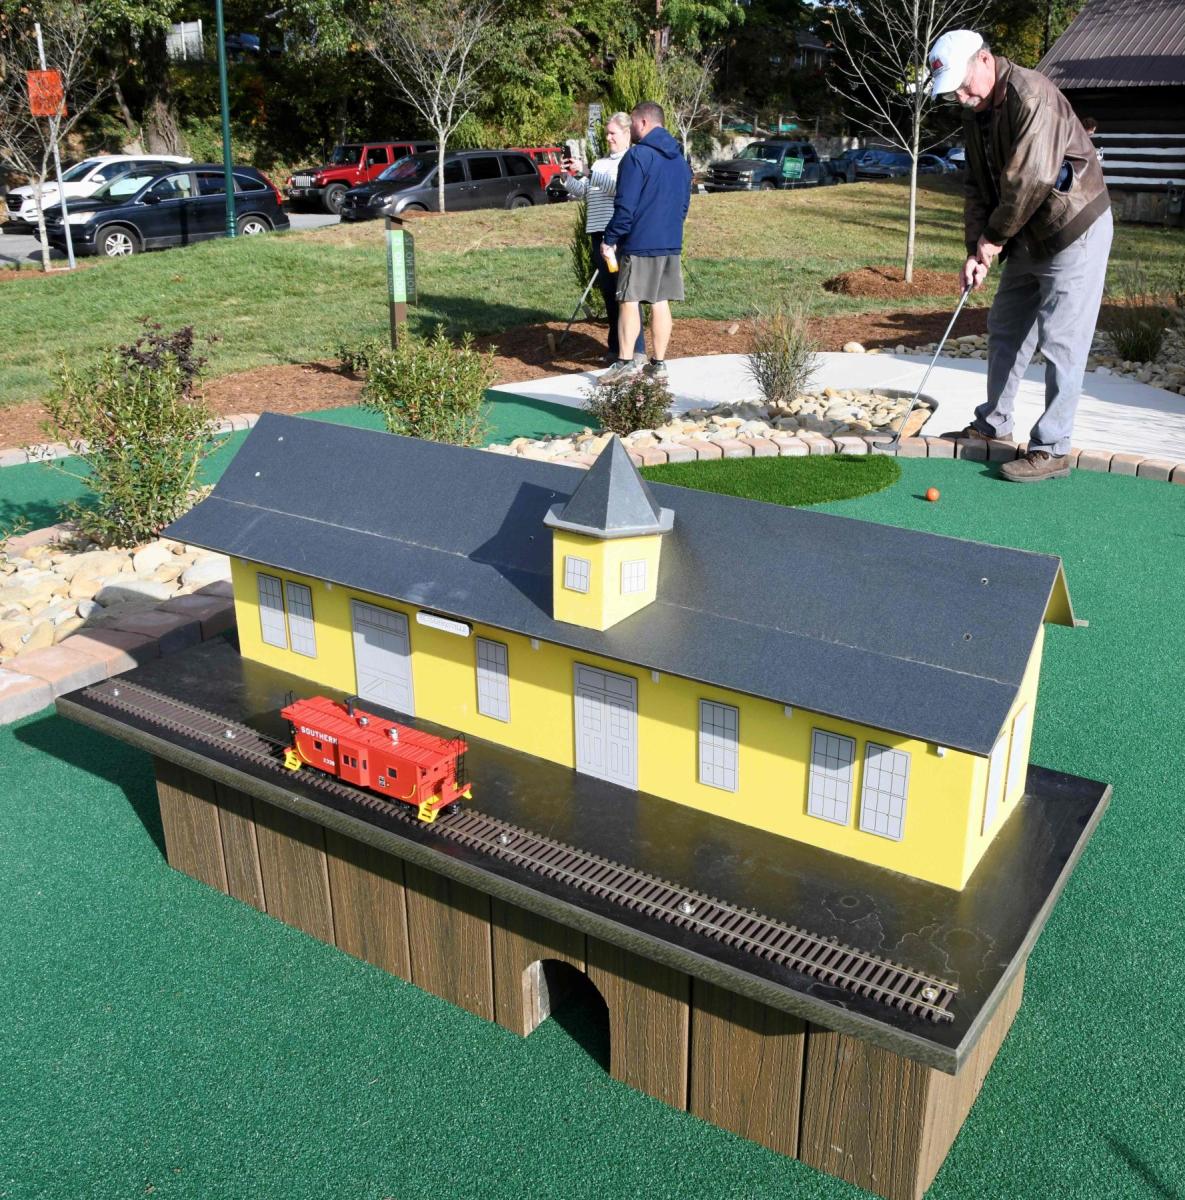 Replica of the historic train depot on the course